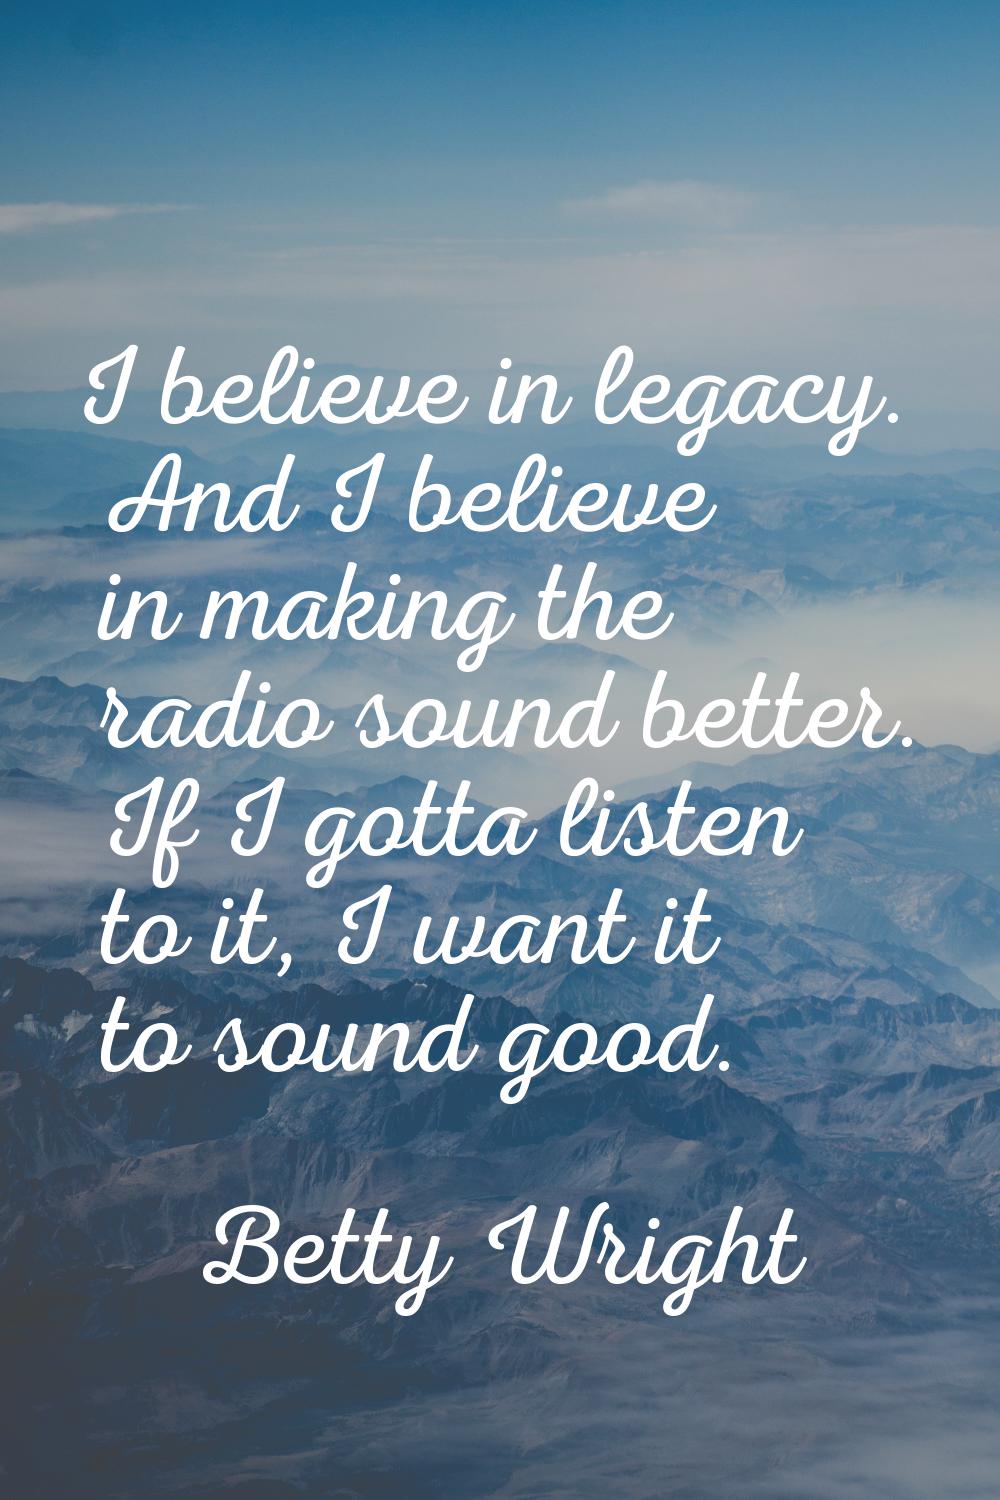 I believe in legacy. And I believe in making the radio sound better. If I gotta listen to it, I wan